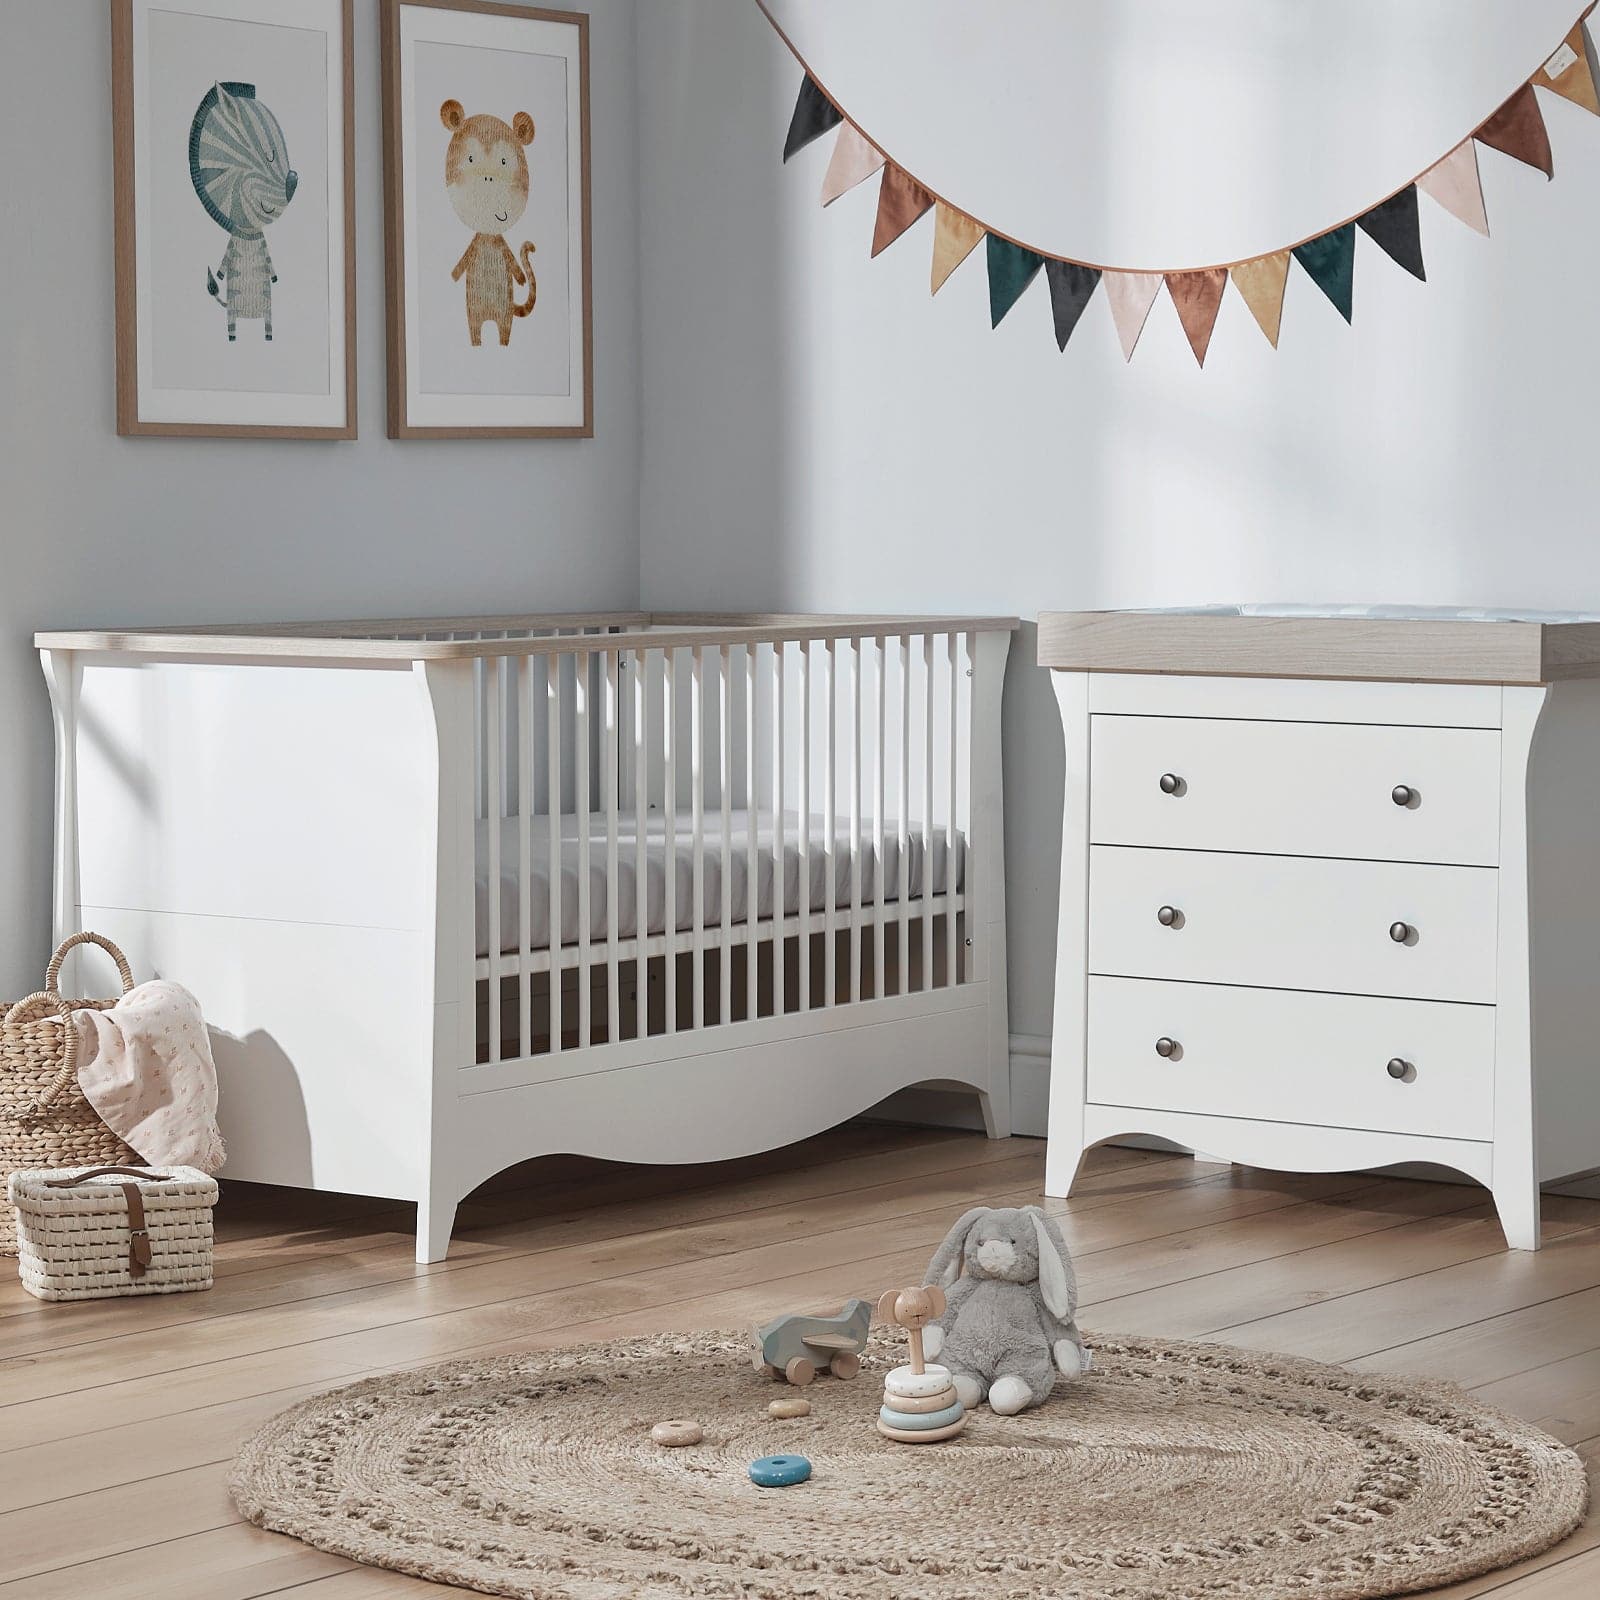 Cuddleco Clara 2 Piece Nursery Furniture Set - White & Ash - For Your Little One